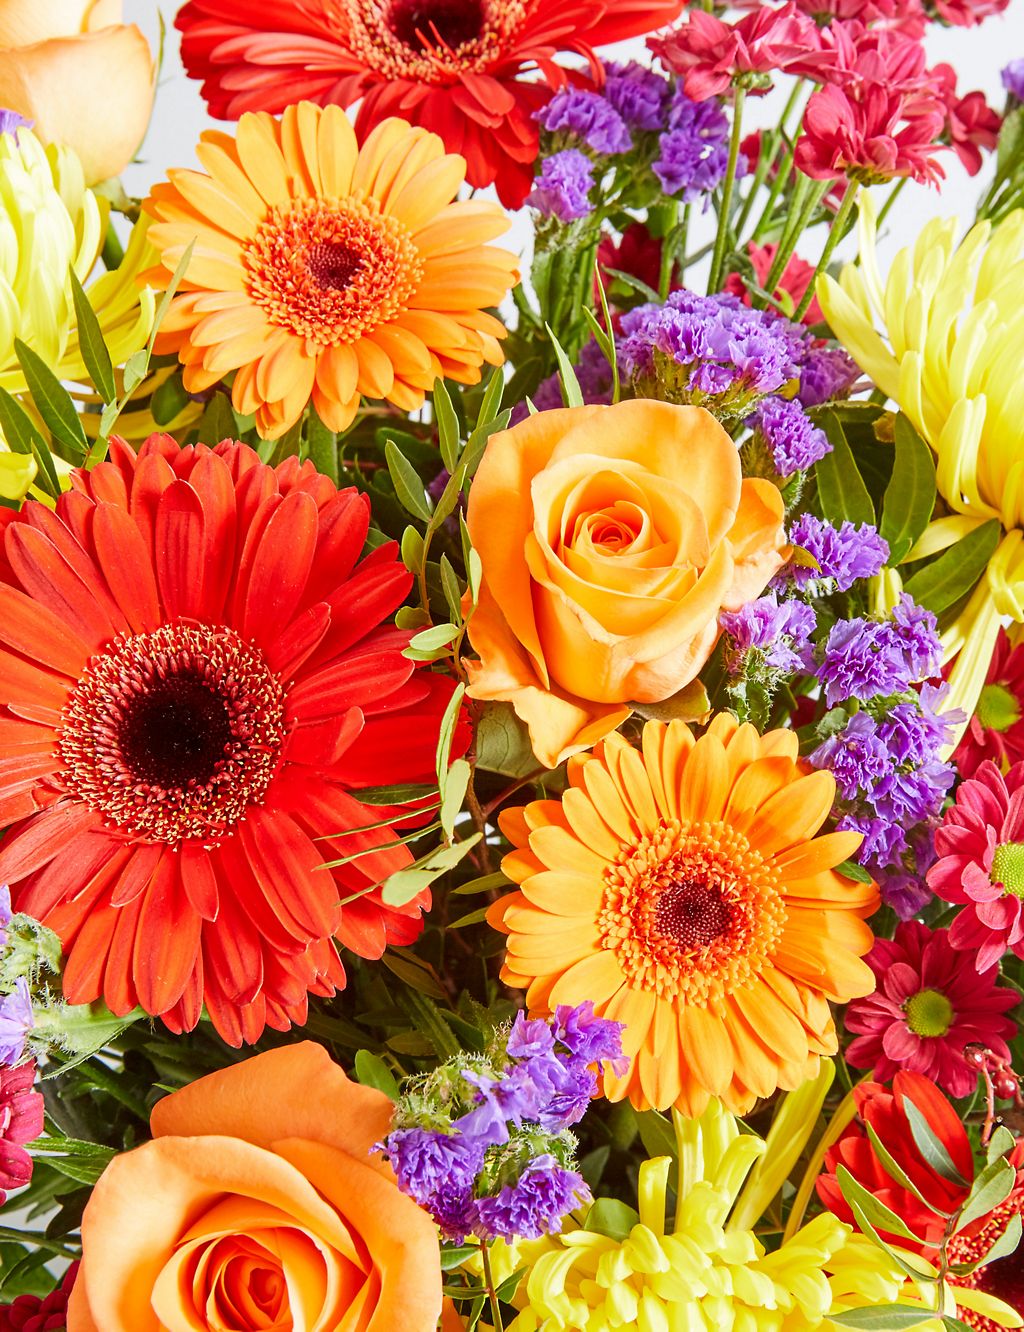 Mother’s Day Bright Bouquet with Free Chocolates Worth £6 4 of 7